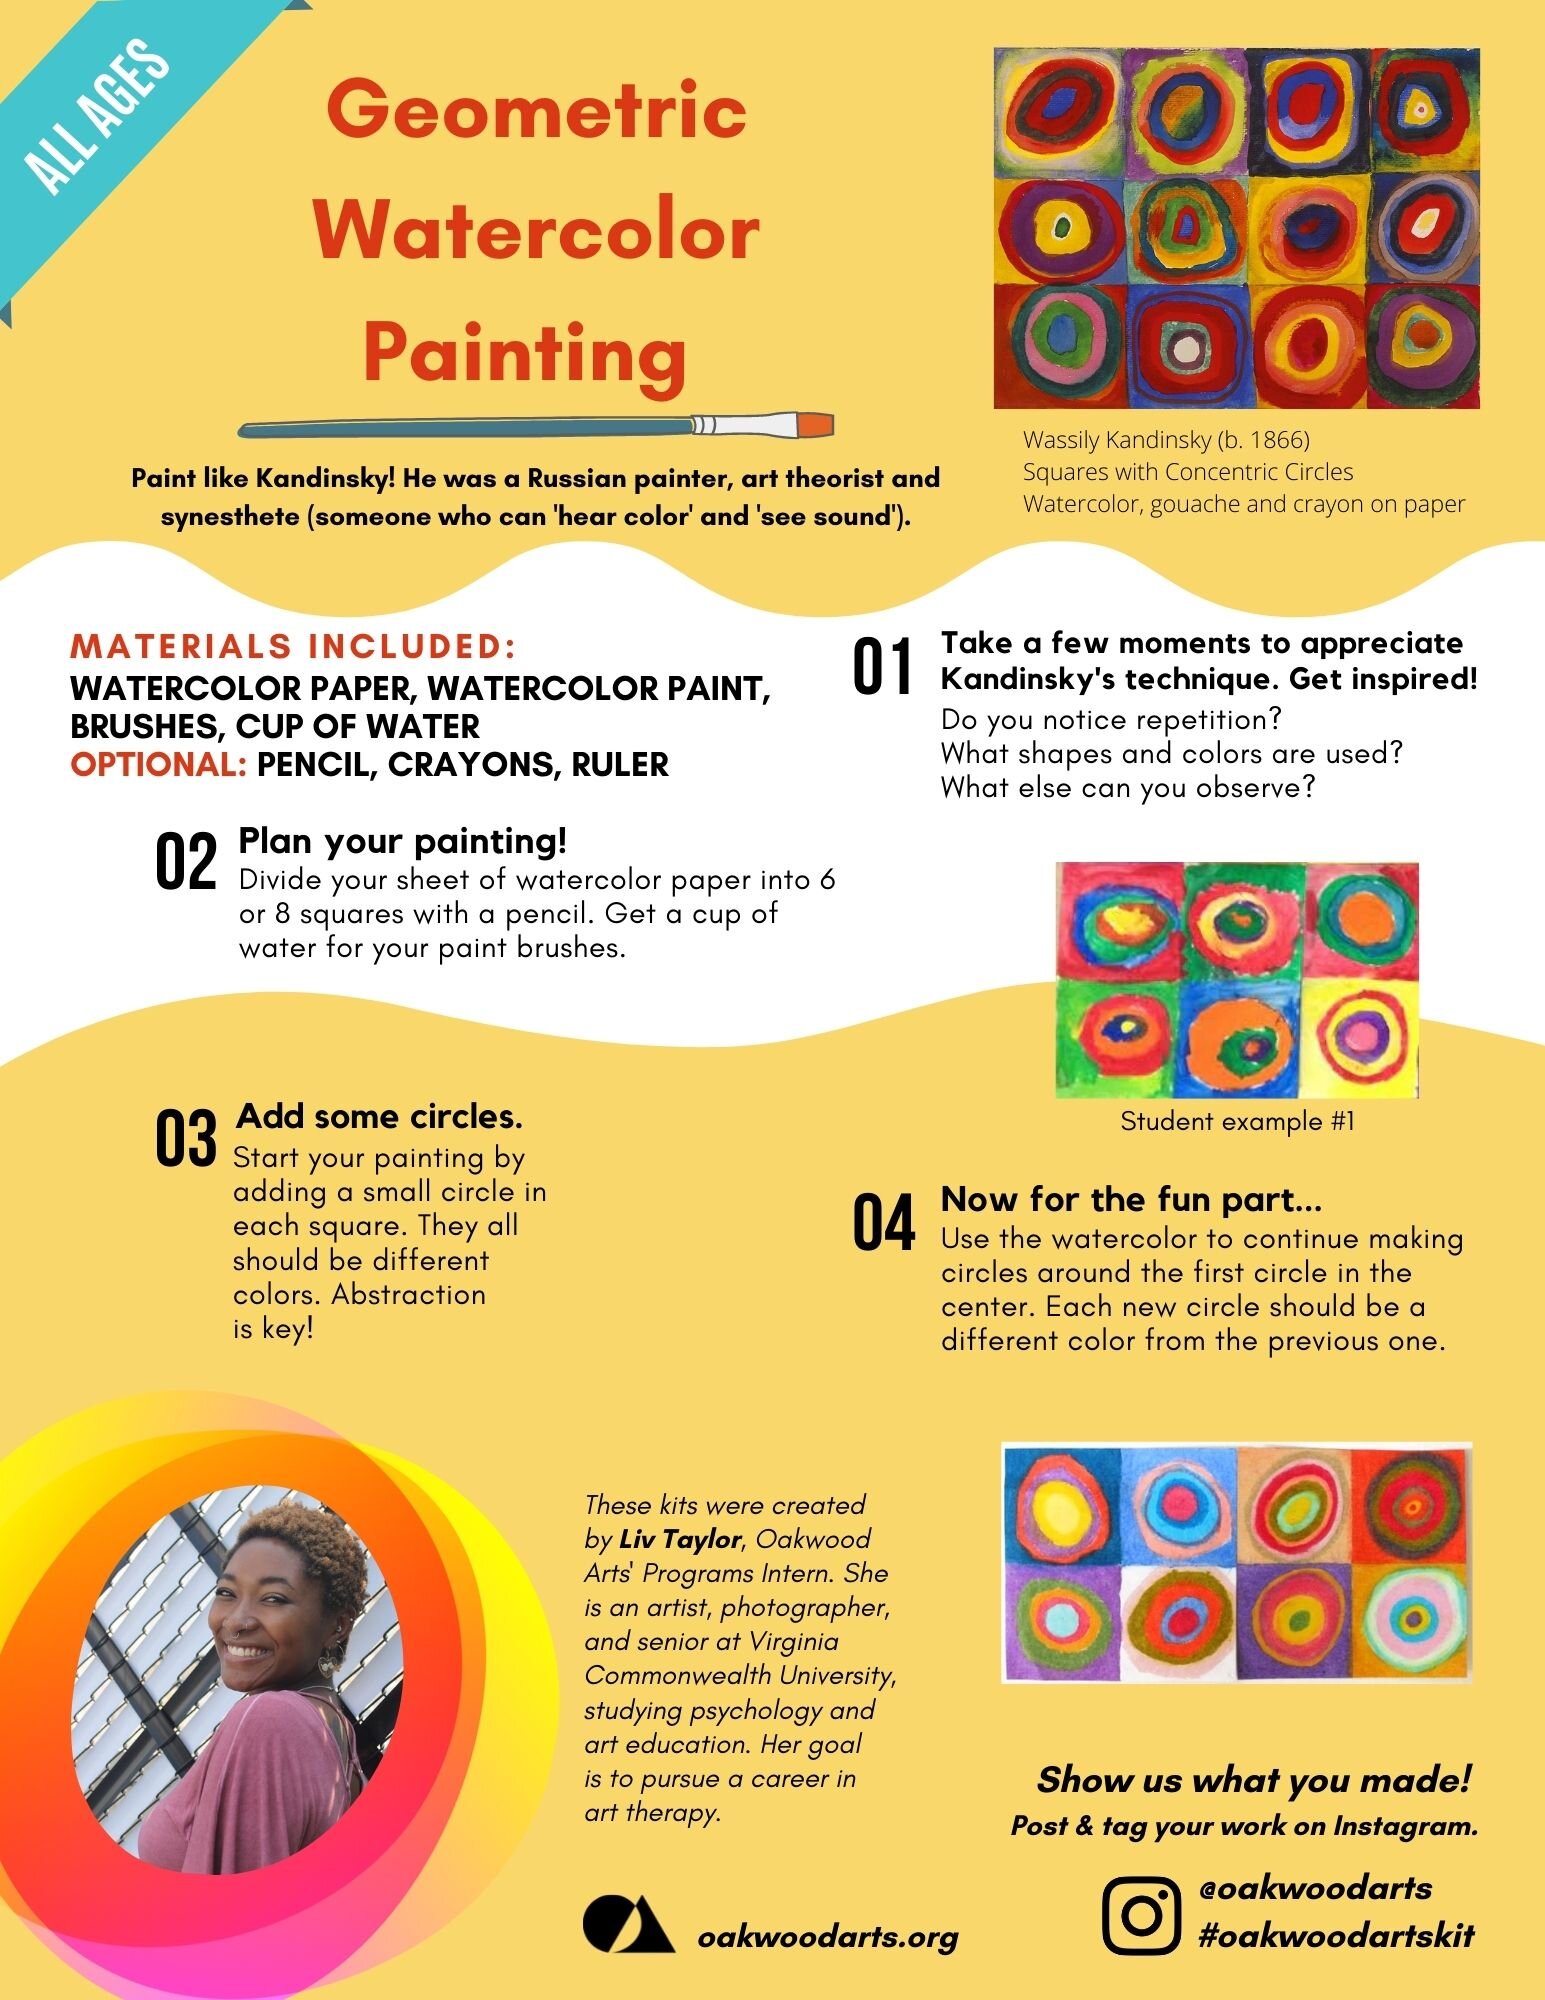 How to Create an Art Therapy Supplies Kit for Art Therapy Activities